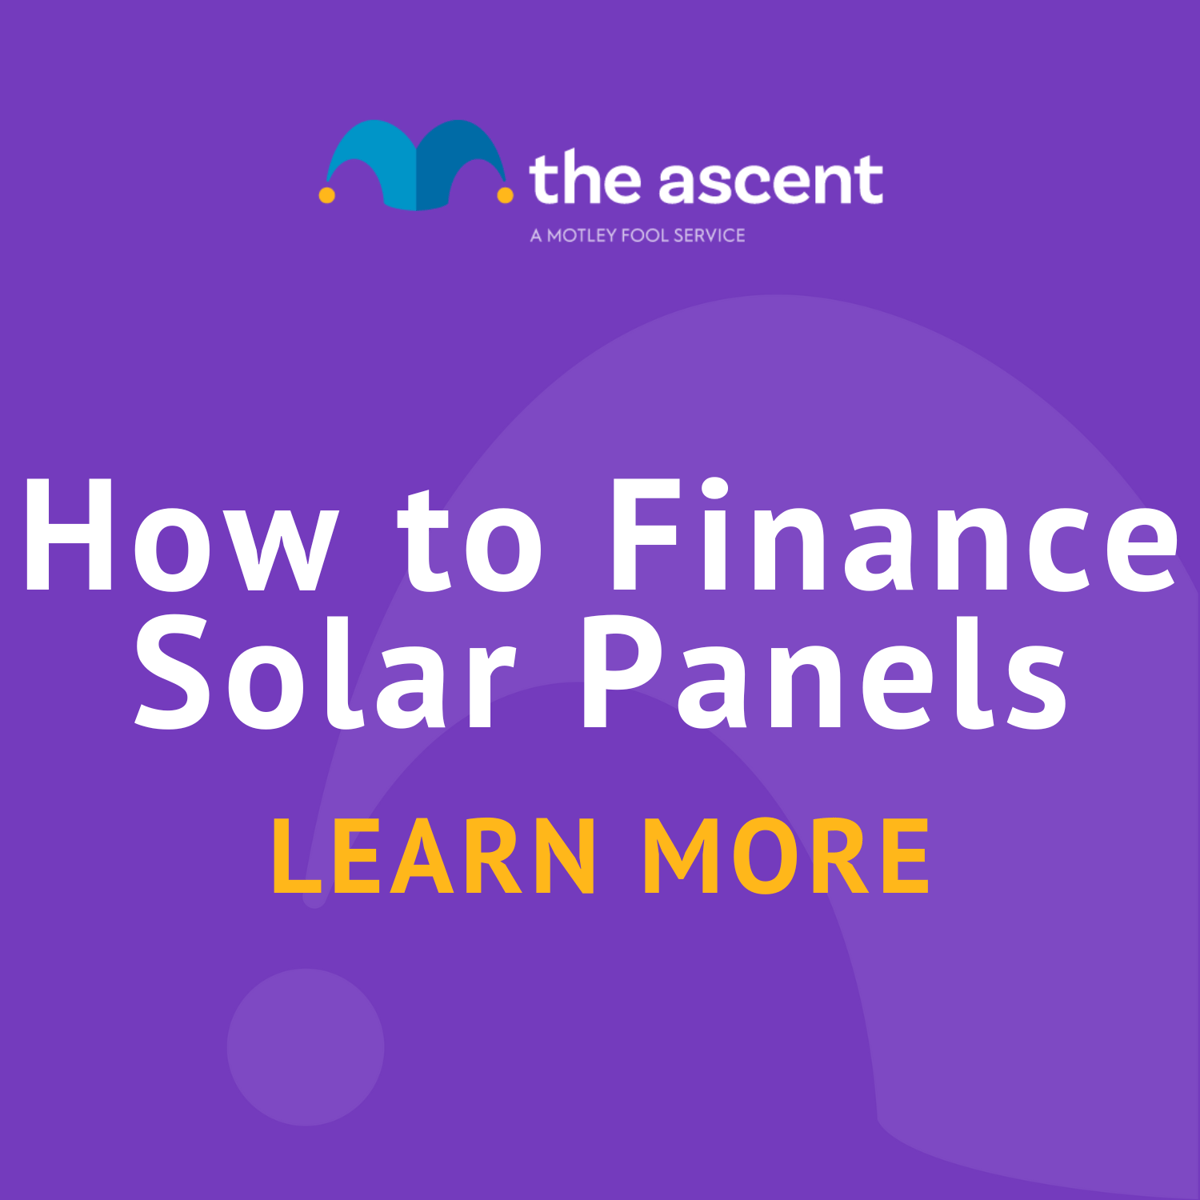 How to Finance Solar Panels